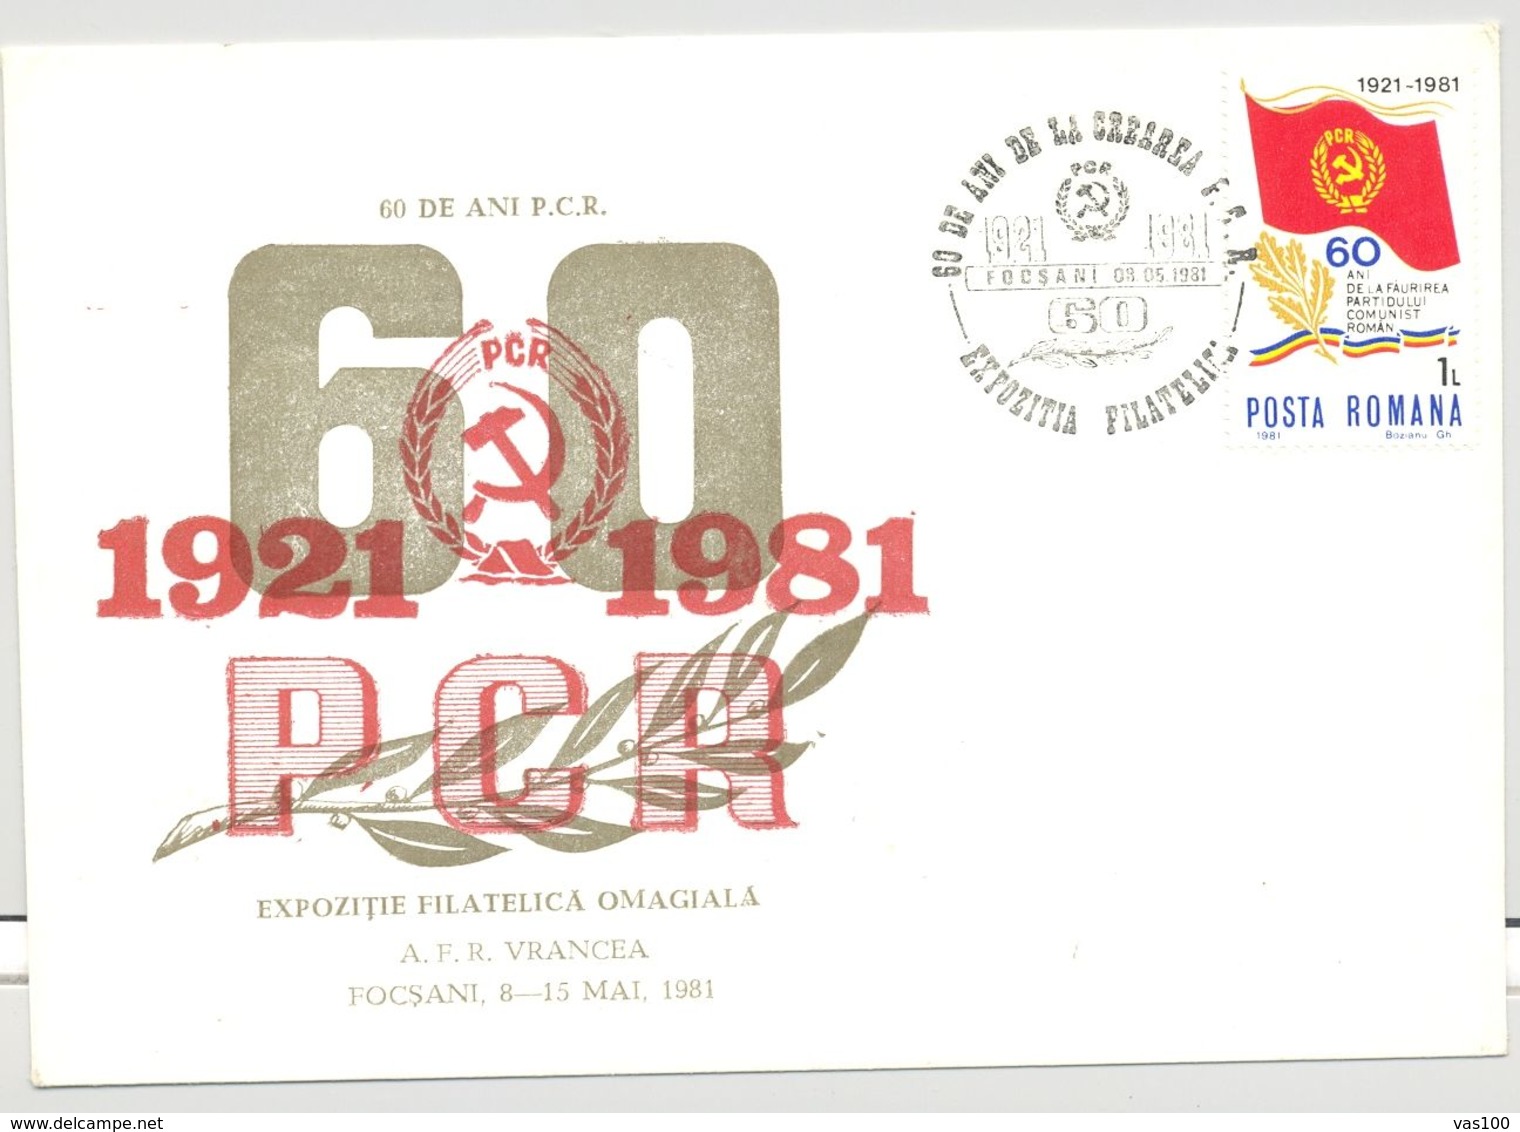 COMMUNIST PARTY ANNIVERSARY, SPECIAL COVER, 1981, ROMANIA - Covers & Documents